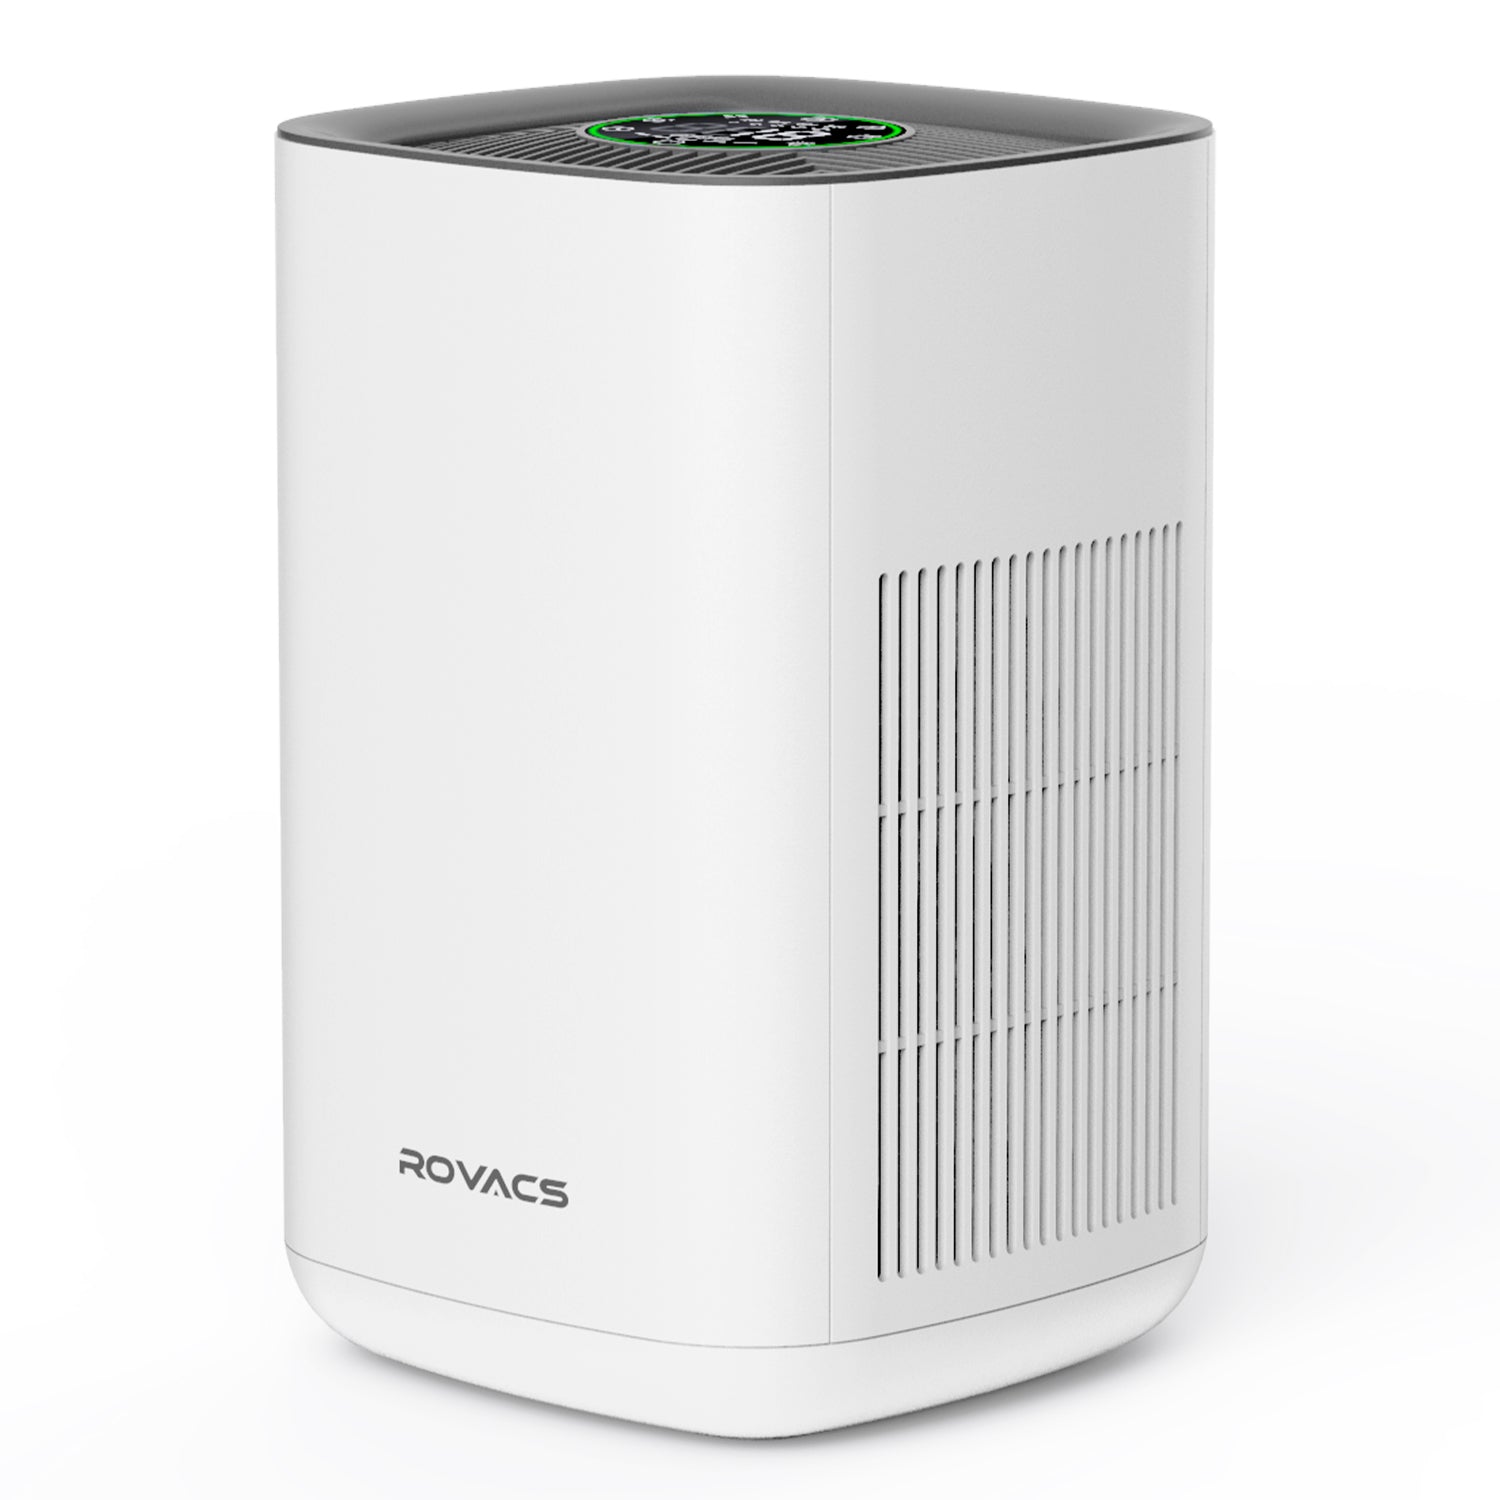 ROVACS Air Purifier RV220, Real HEPA Filter H13, covers 14-24 m2 ( 258ft2 ) , CADR 130 cfm, purifies 99.97% of allergic particles, pollen, smoke, pet dander, odors, Rated Voltage: DC24V 1.0A, Rated Power: 24W, Noise: 32-52dB